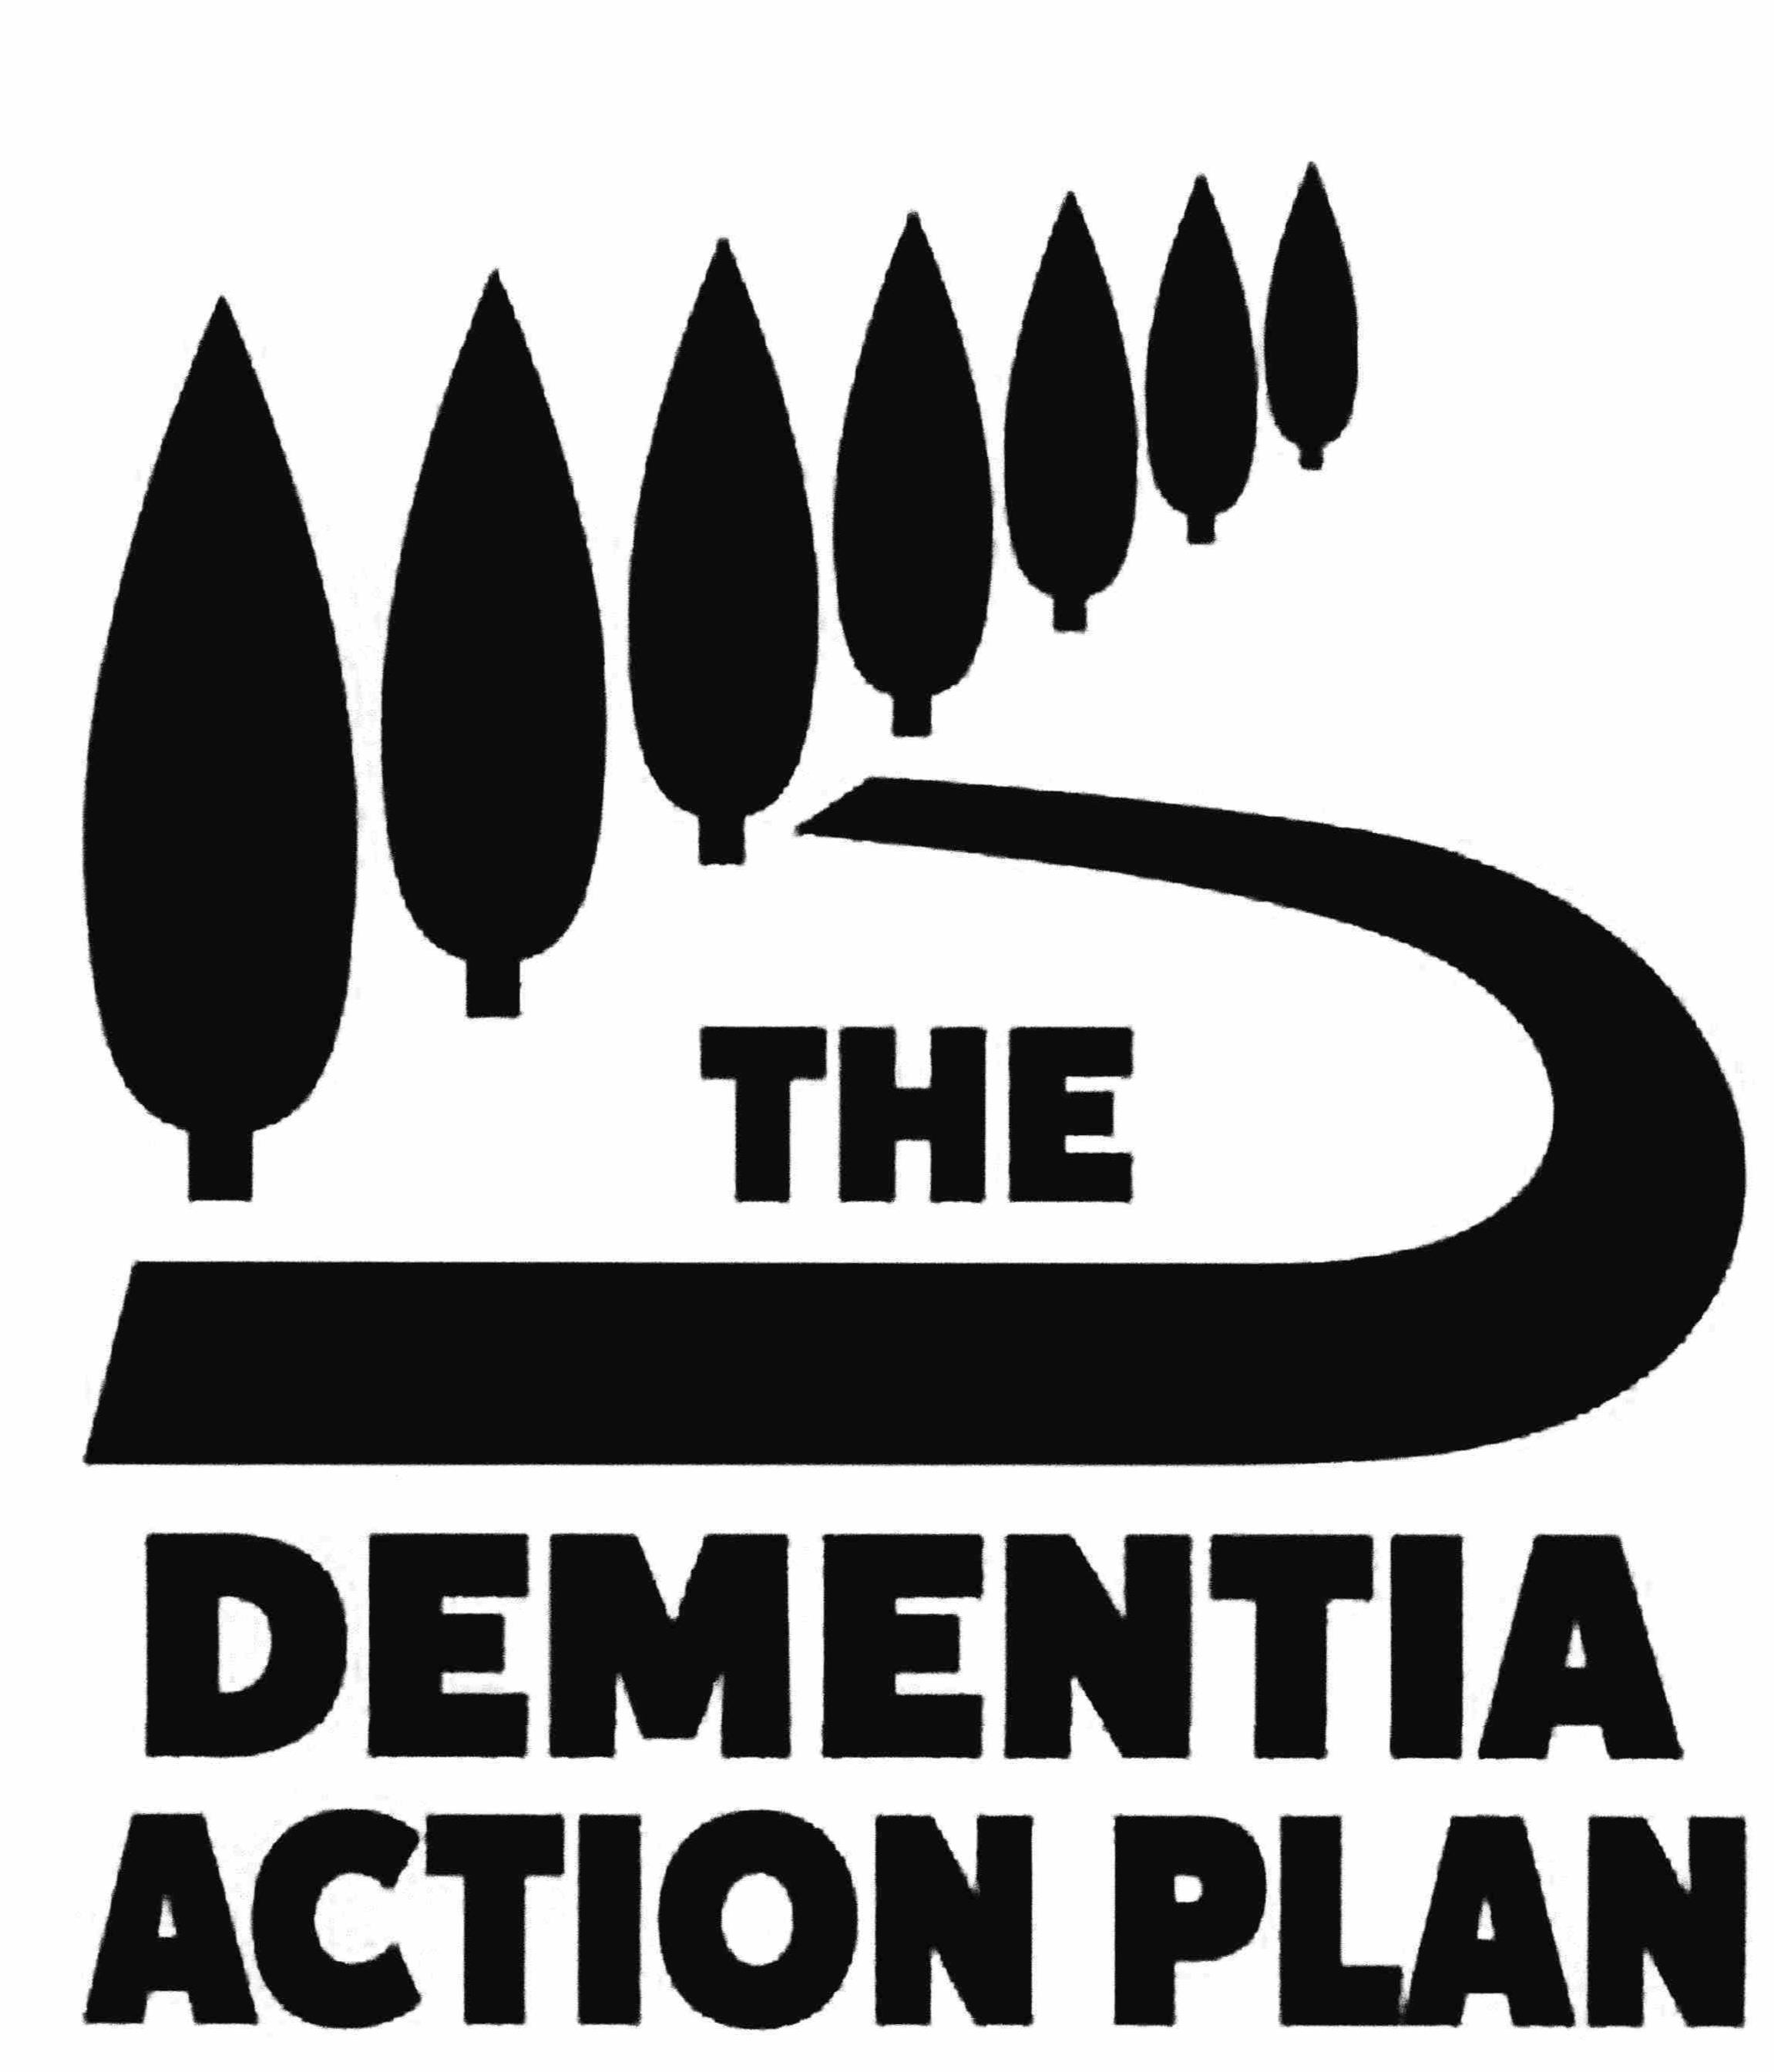 THE DEMENTIA ACTION PLAN